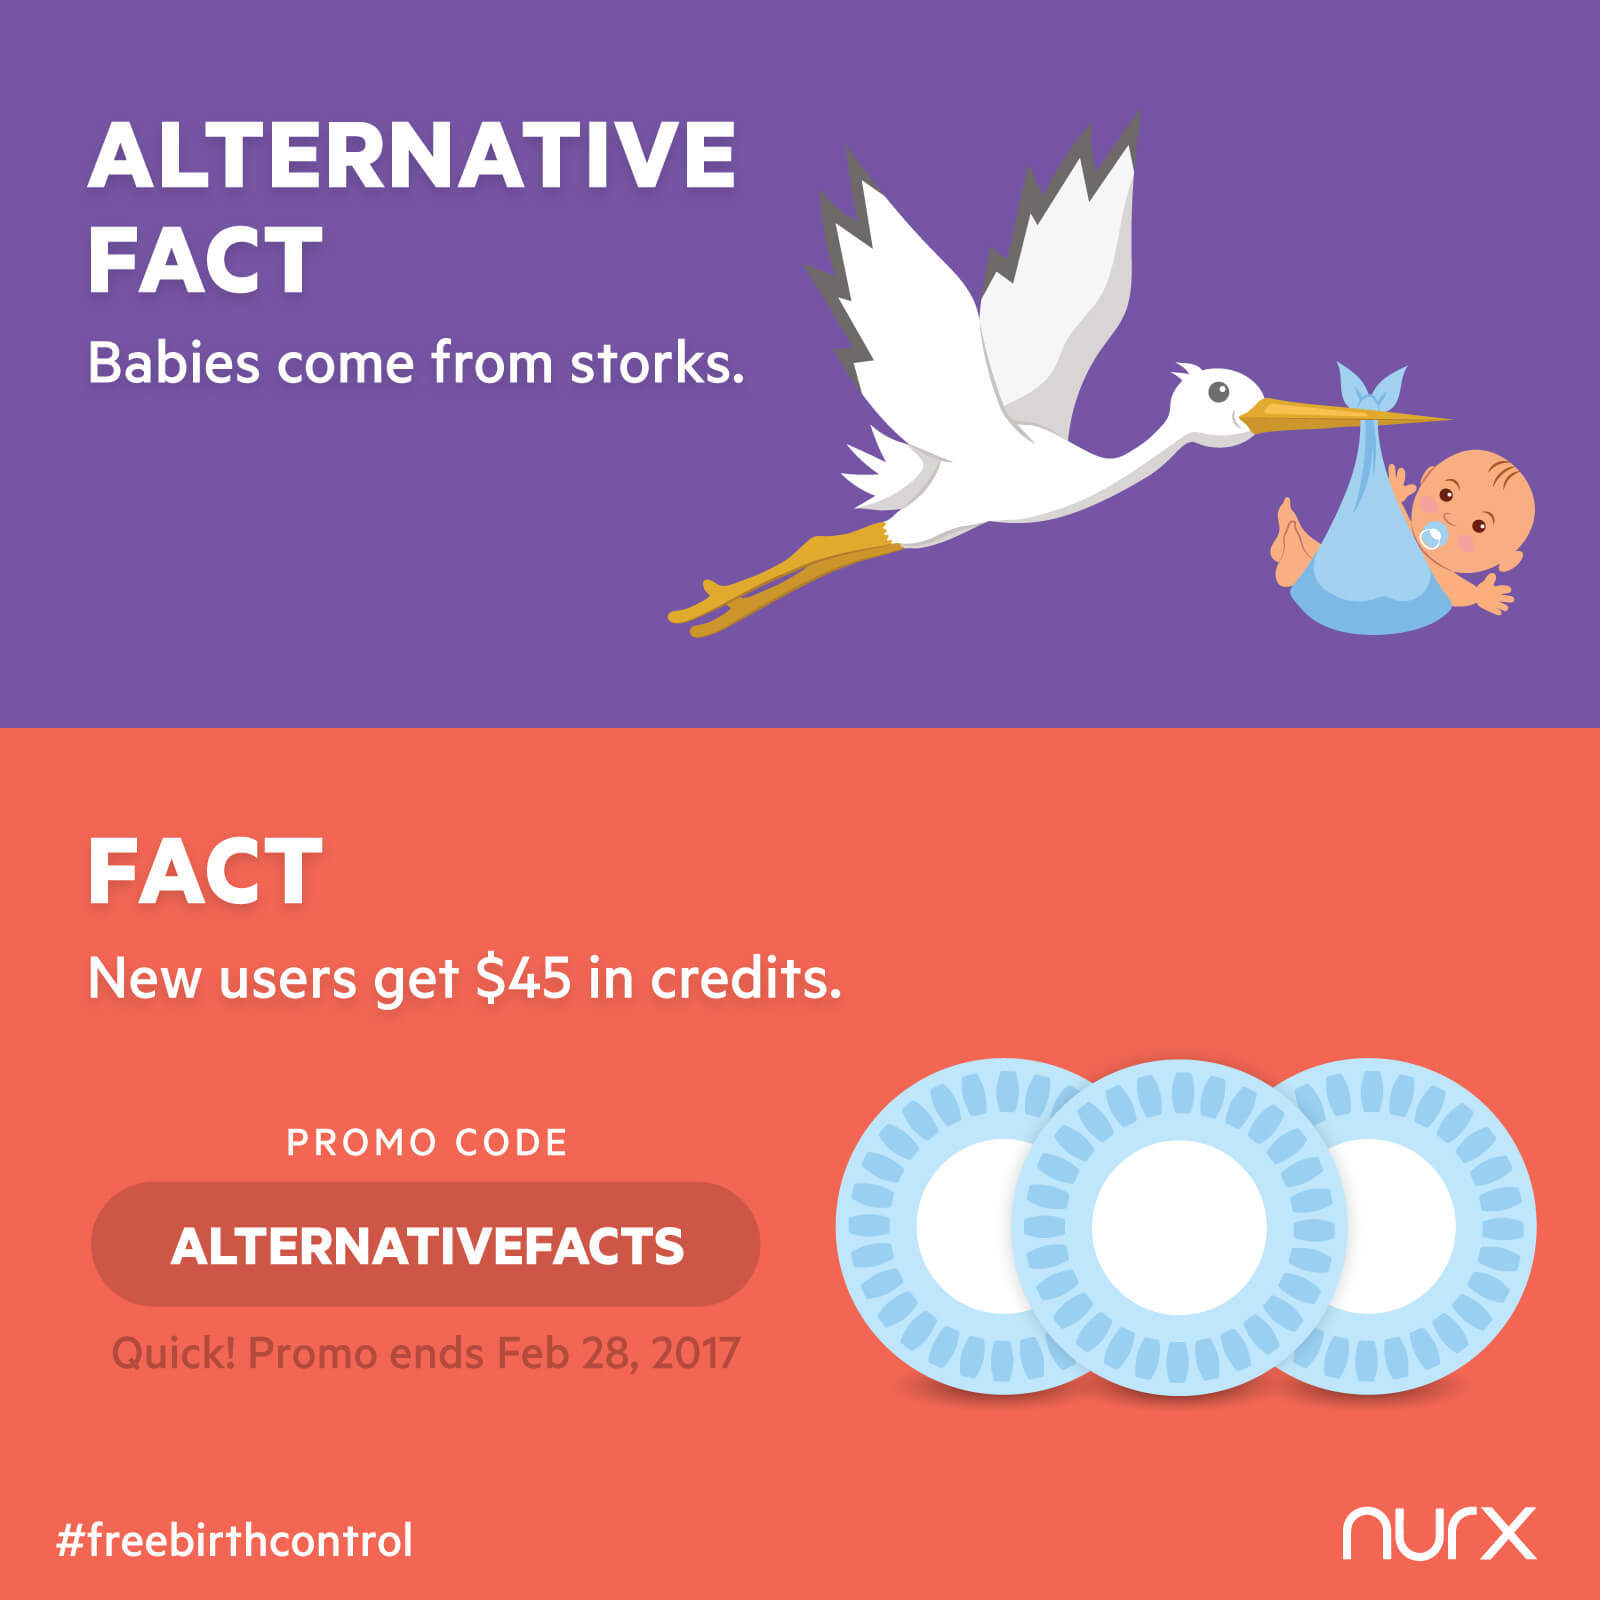 Nurx Offers Free Birth Control with Promo Code 'AlternativeFacts' Nurx